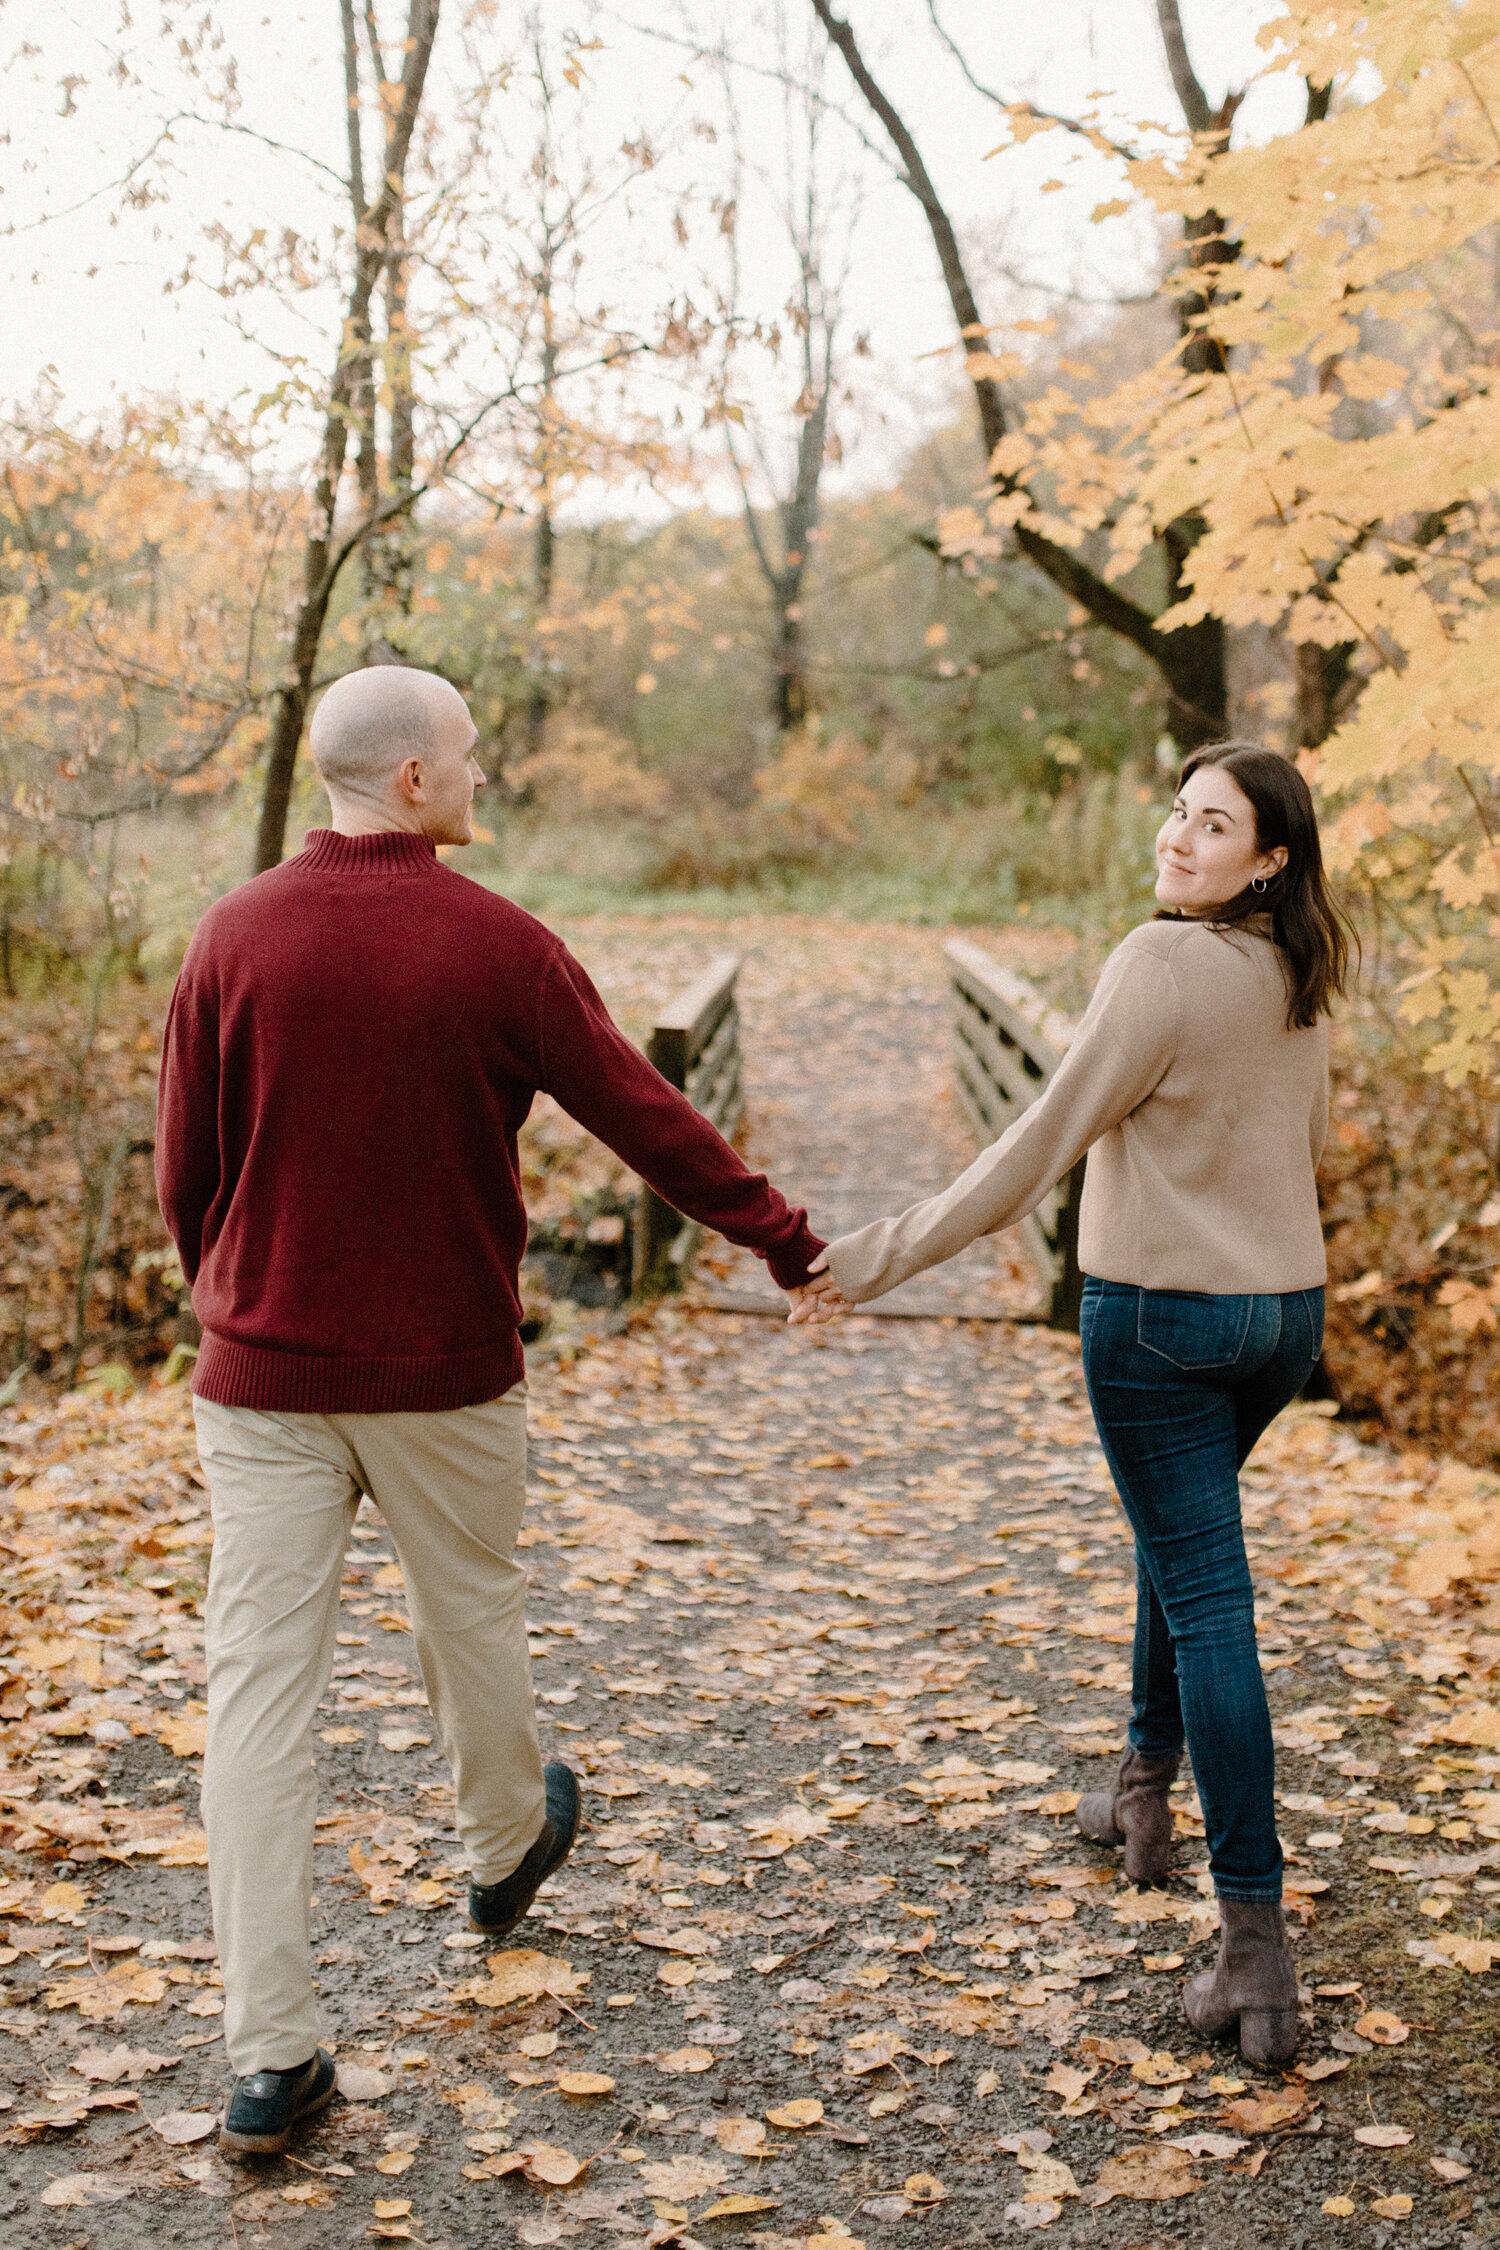  While walking on a wooden bridge in Ottawa Canada, hand-in-hand, this soon-to-be bride looks over her shoulder to smile for a photo for Chelsea Mason Photography. damp gravel ground with fallen autumn leaves, yellow autumn leaves, mens red pullover 